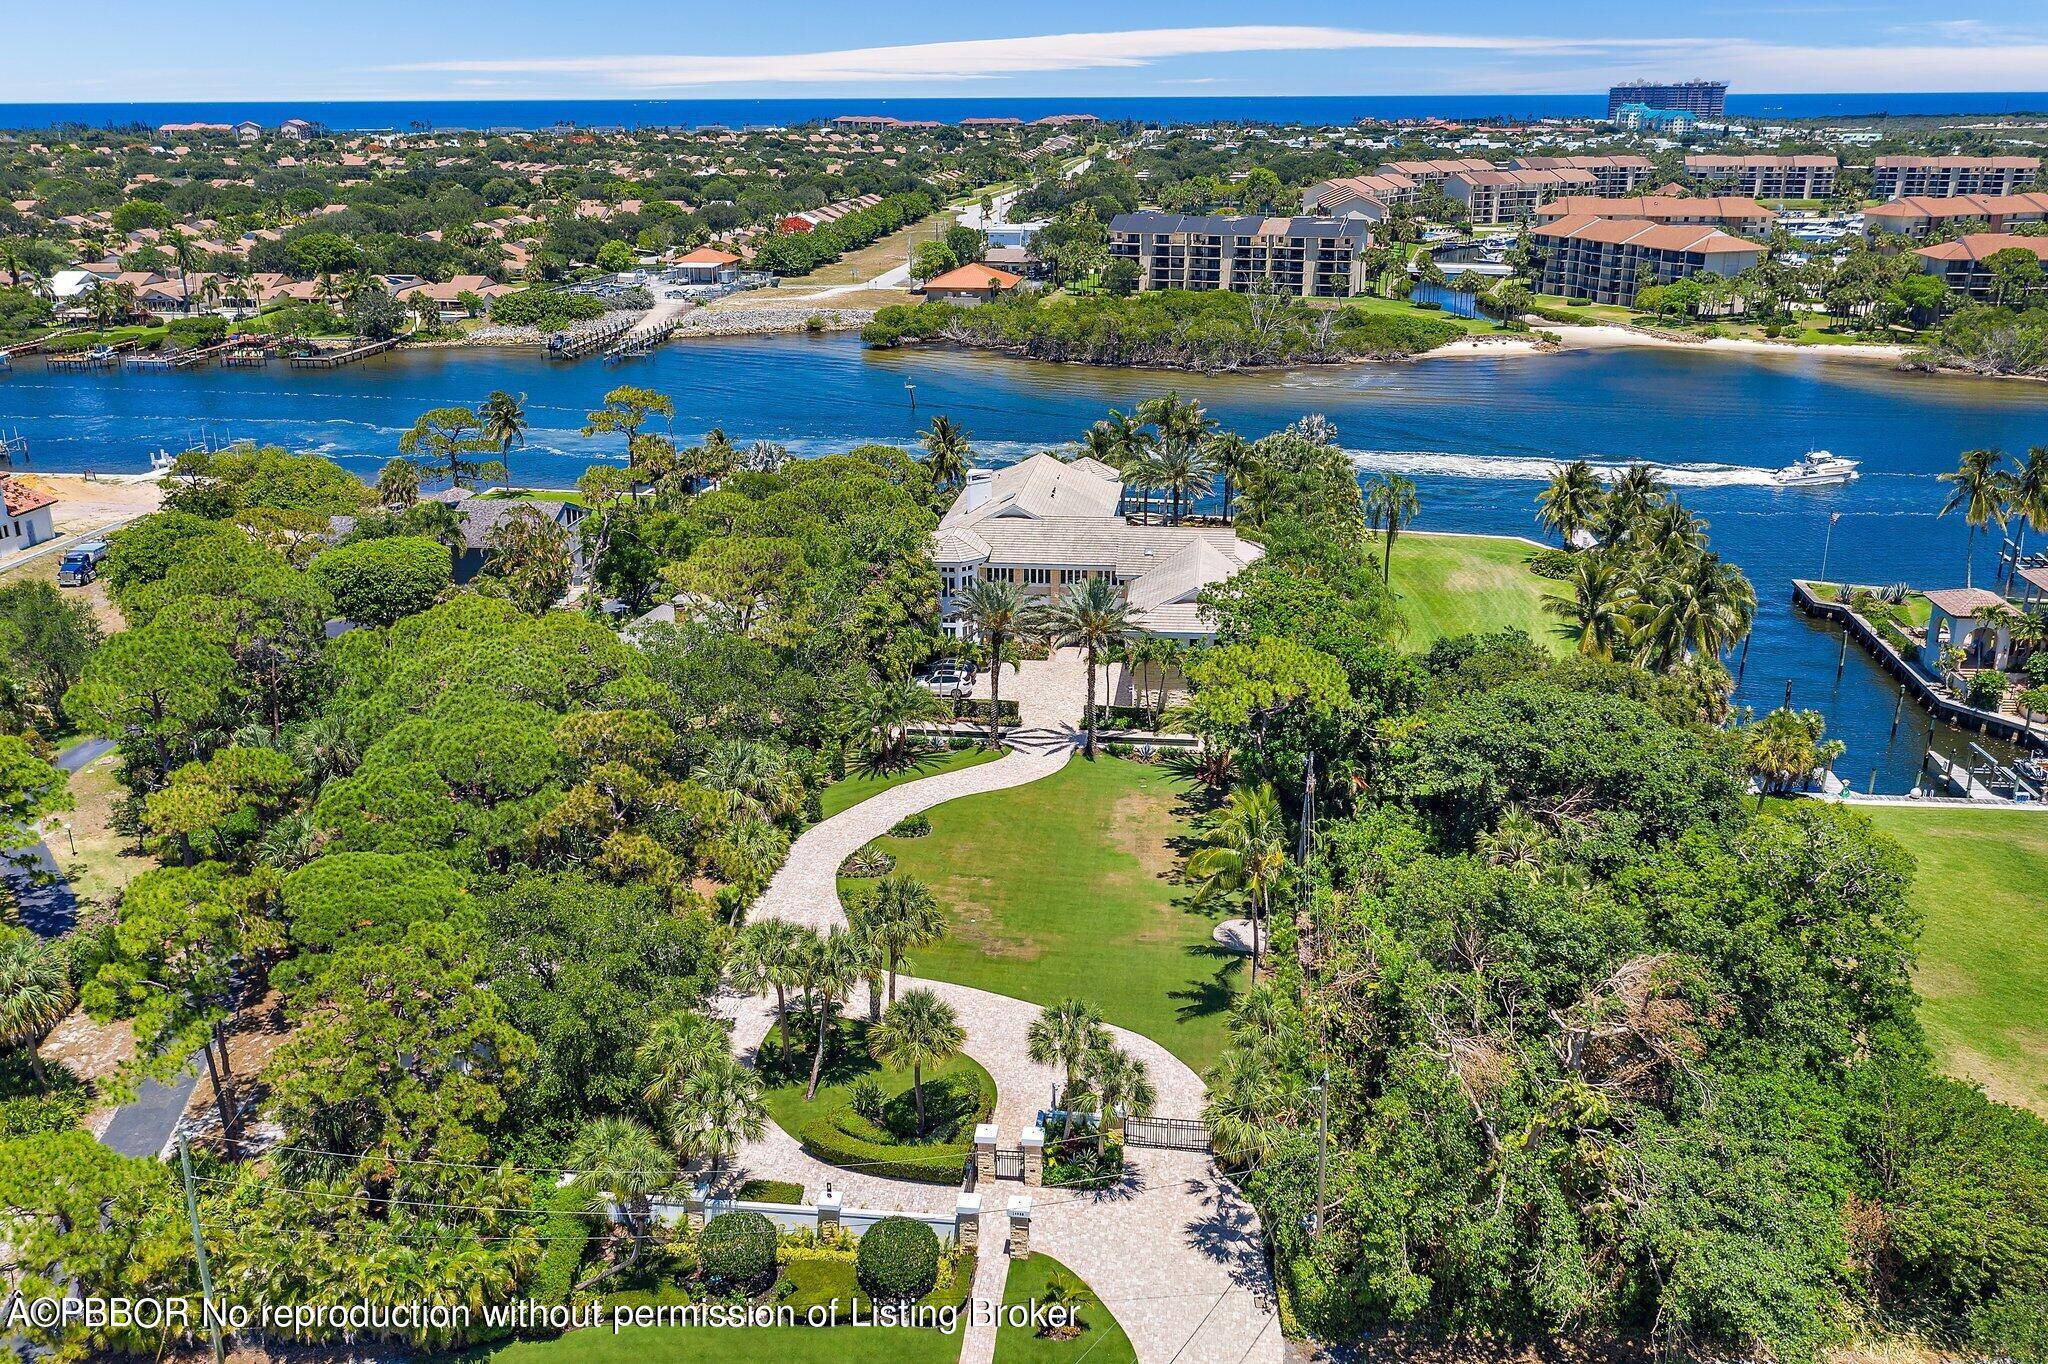 Rare Opportunity ! Stunning palatial modern Intracoastal home with over 9, 300 interior SF and 106' of direct deep water frontage !